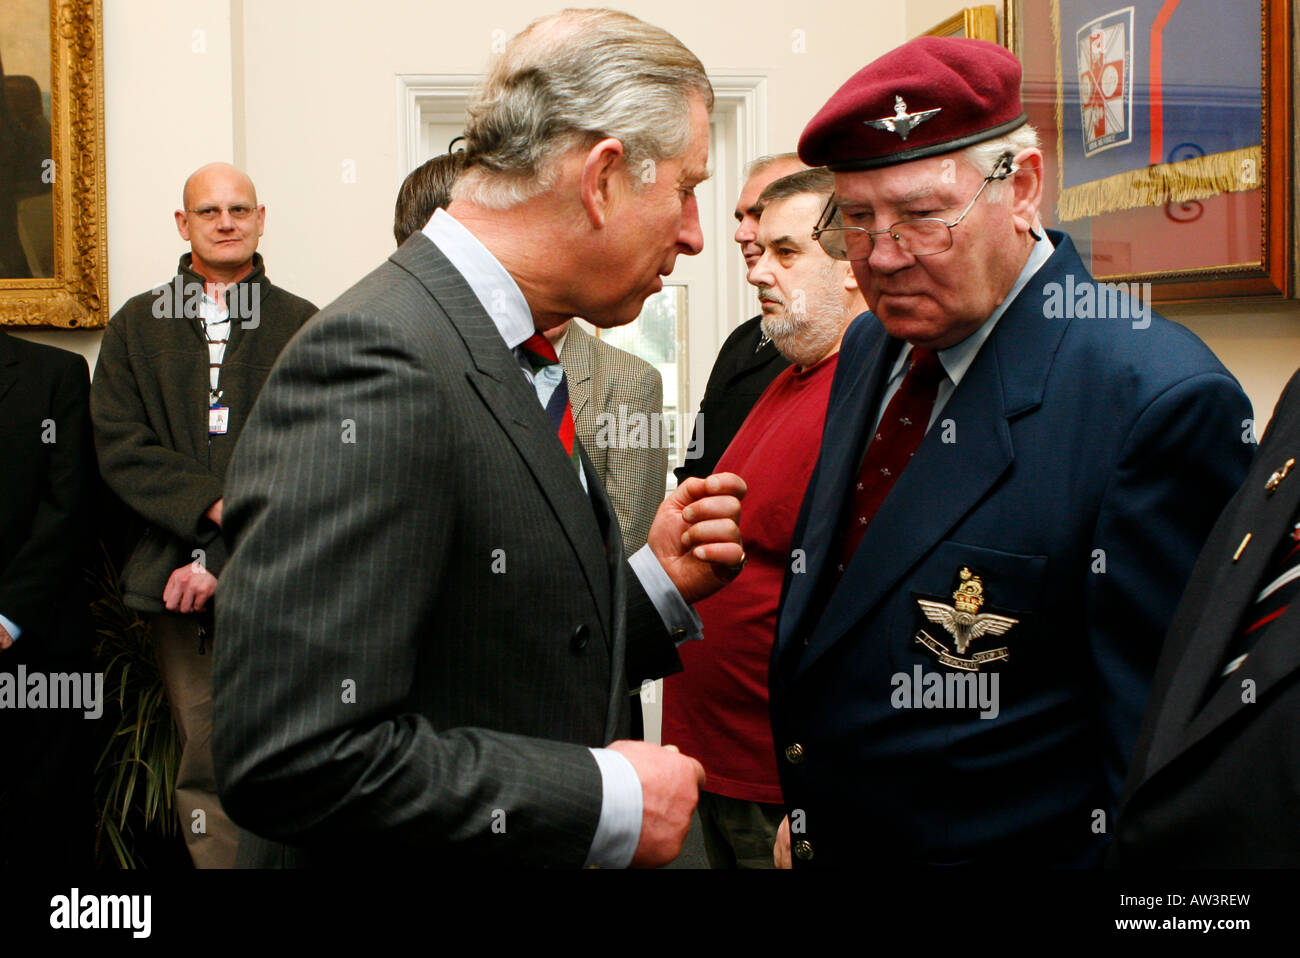 Prince Charles talks to a veteran during a visit to Combat Stress, the ex-servicemen welfare association based in Leatherhead. Stock Photo